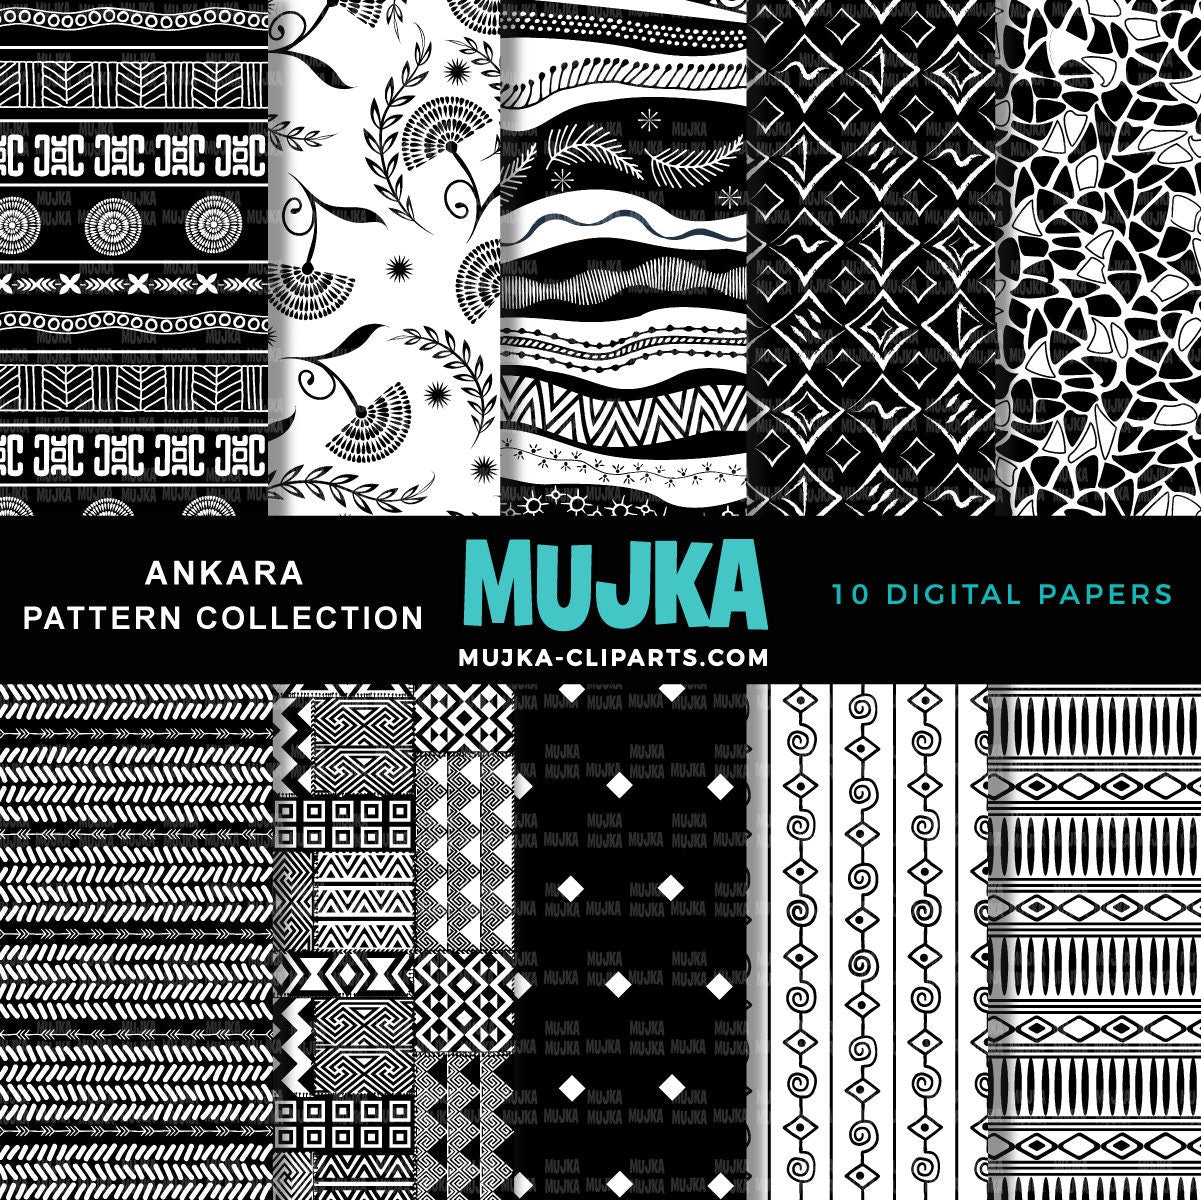 Mud cloth digital papers, masculine digital papers, seamless pattern, geometric patterns, fathers day, African background, kente pattern